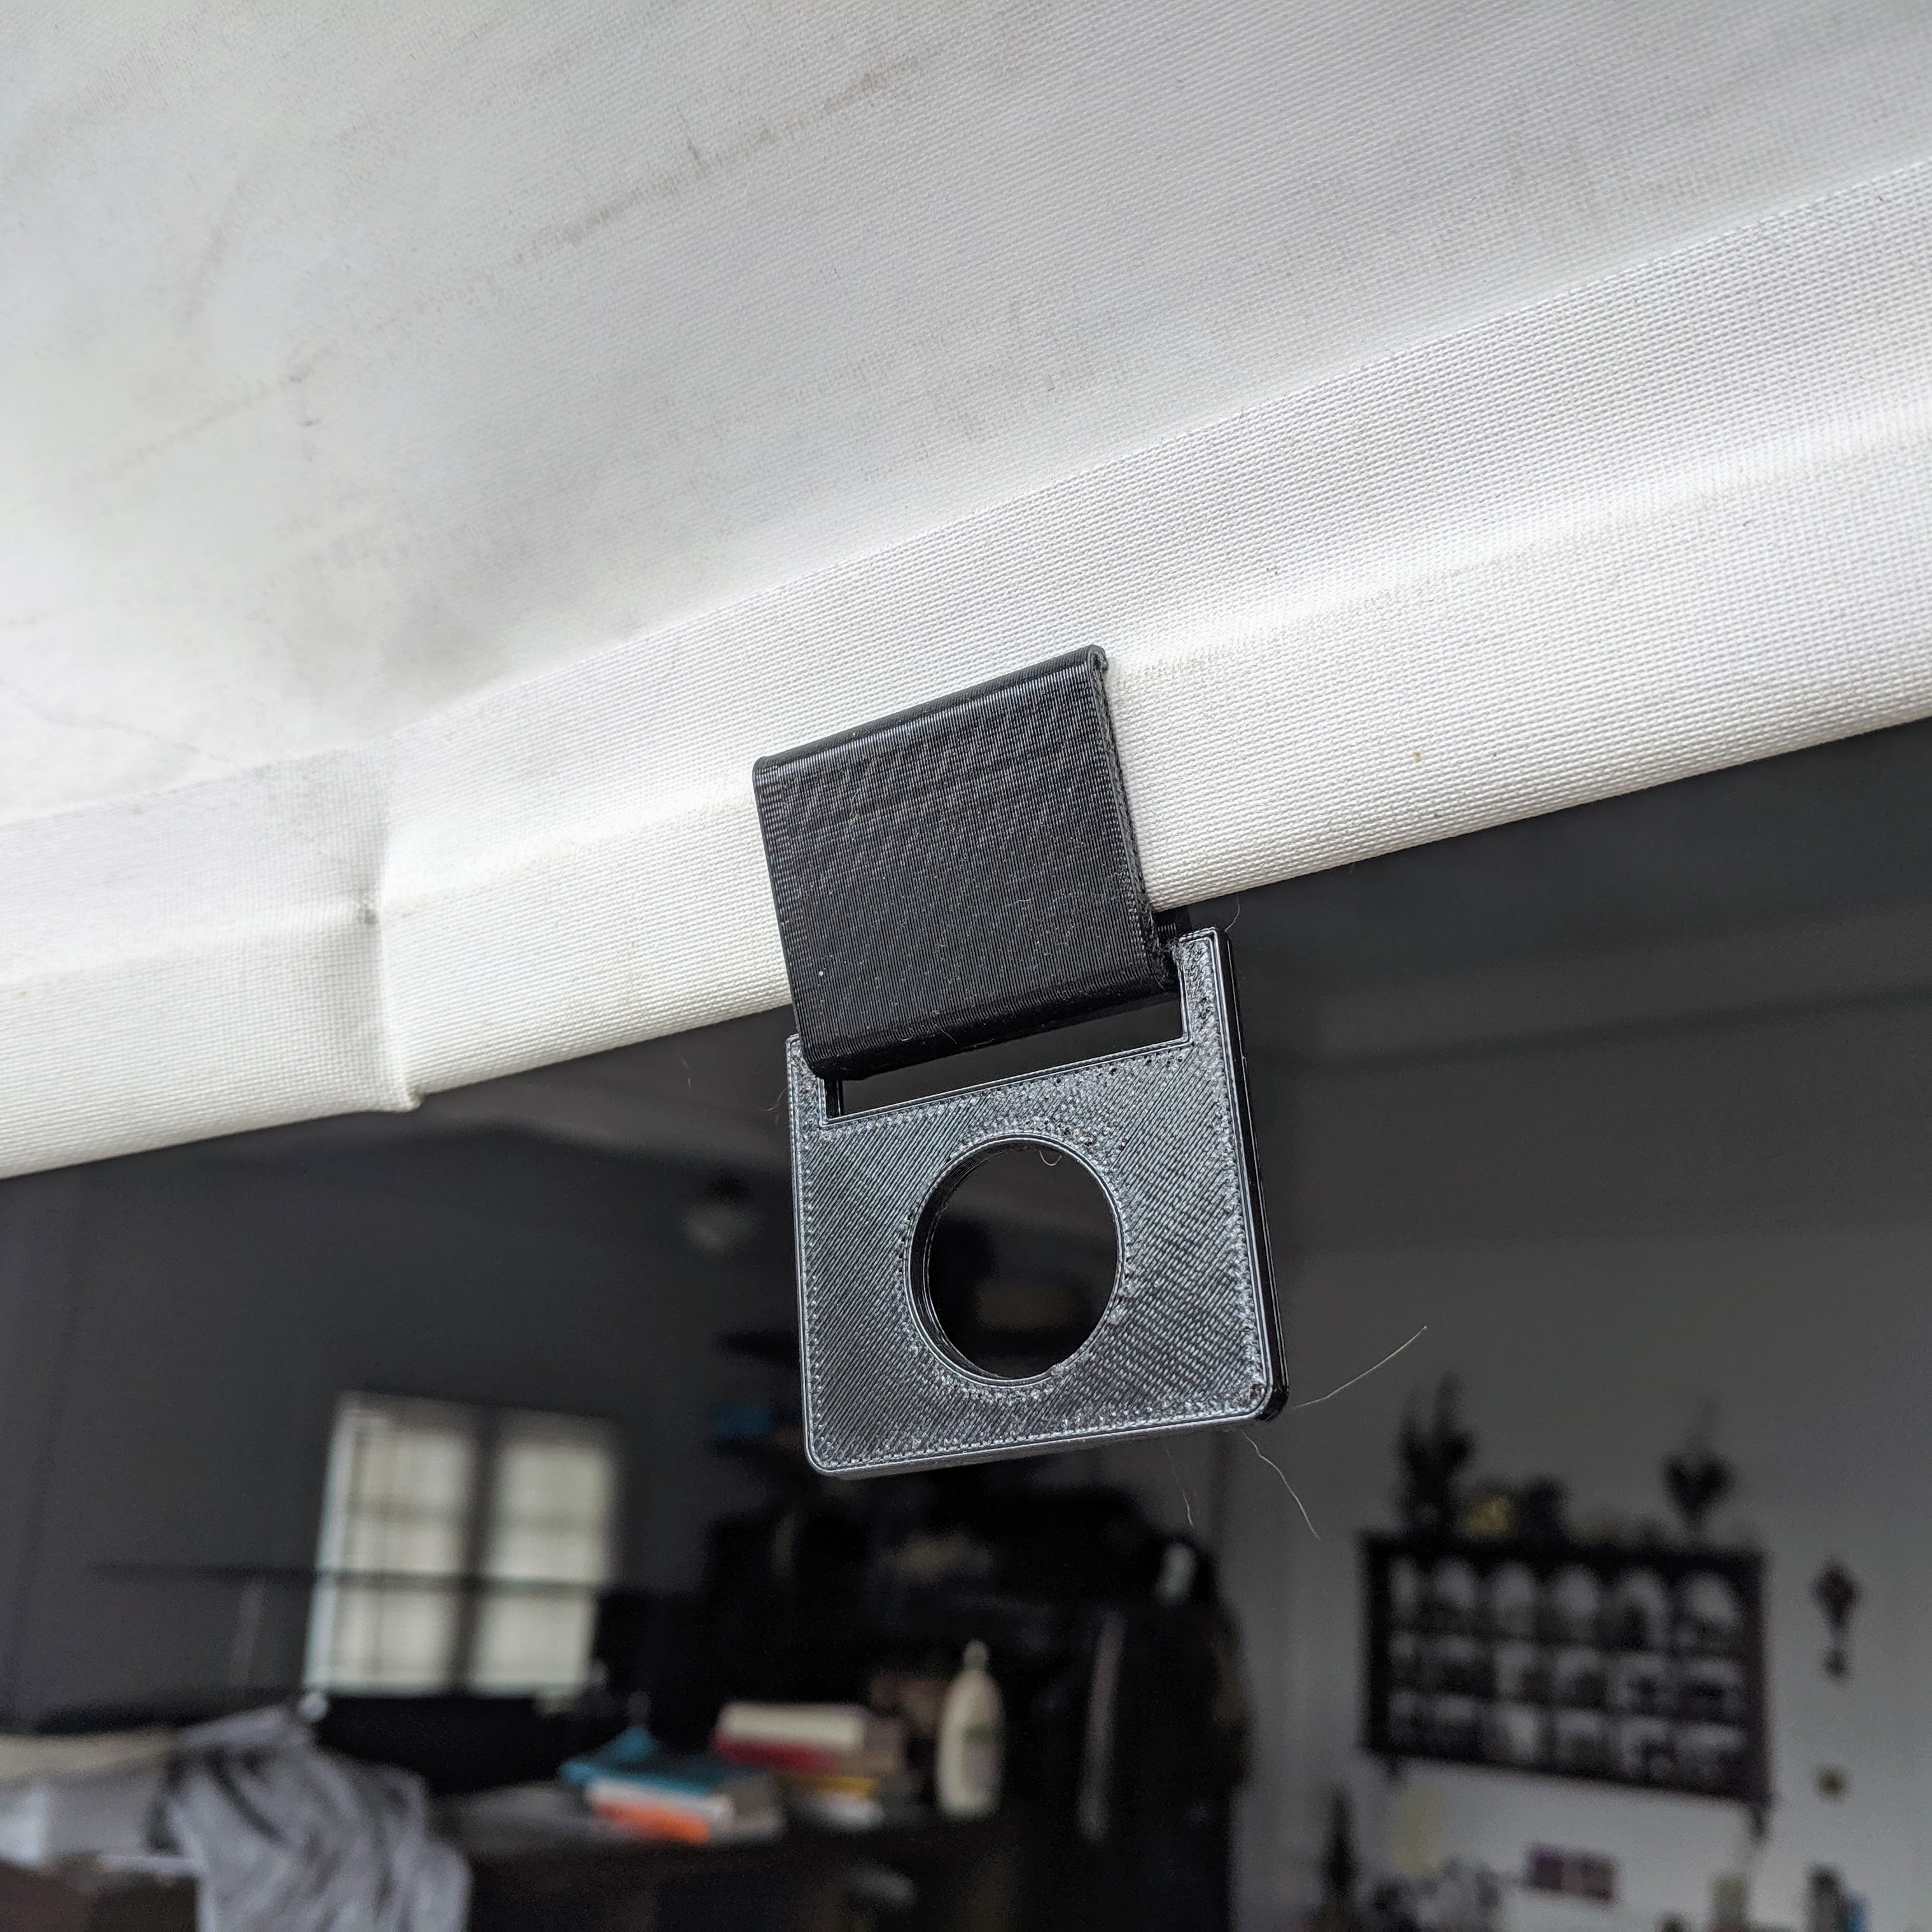 Ikea window blind replacement clip